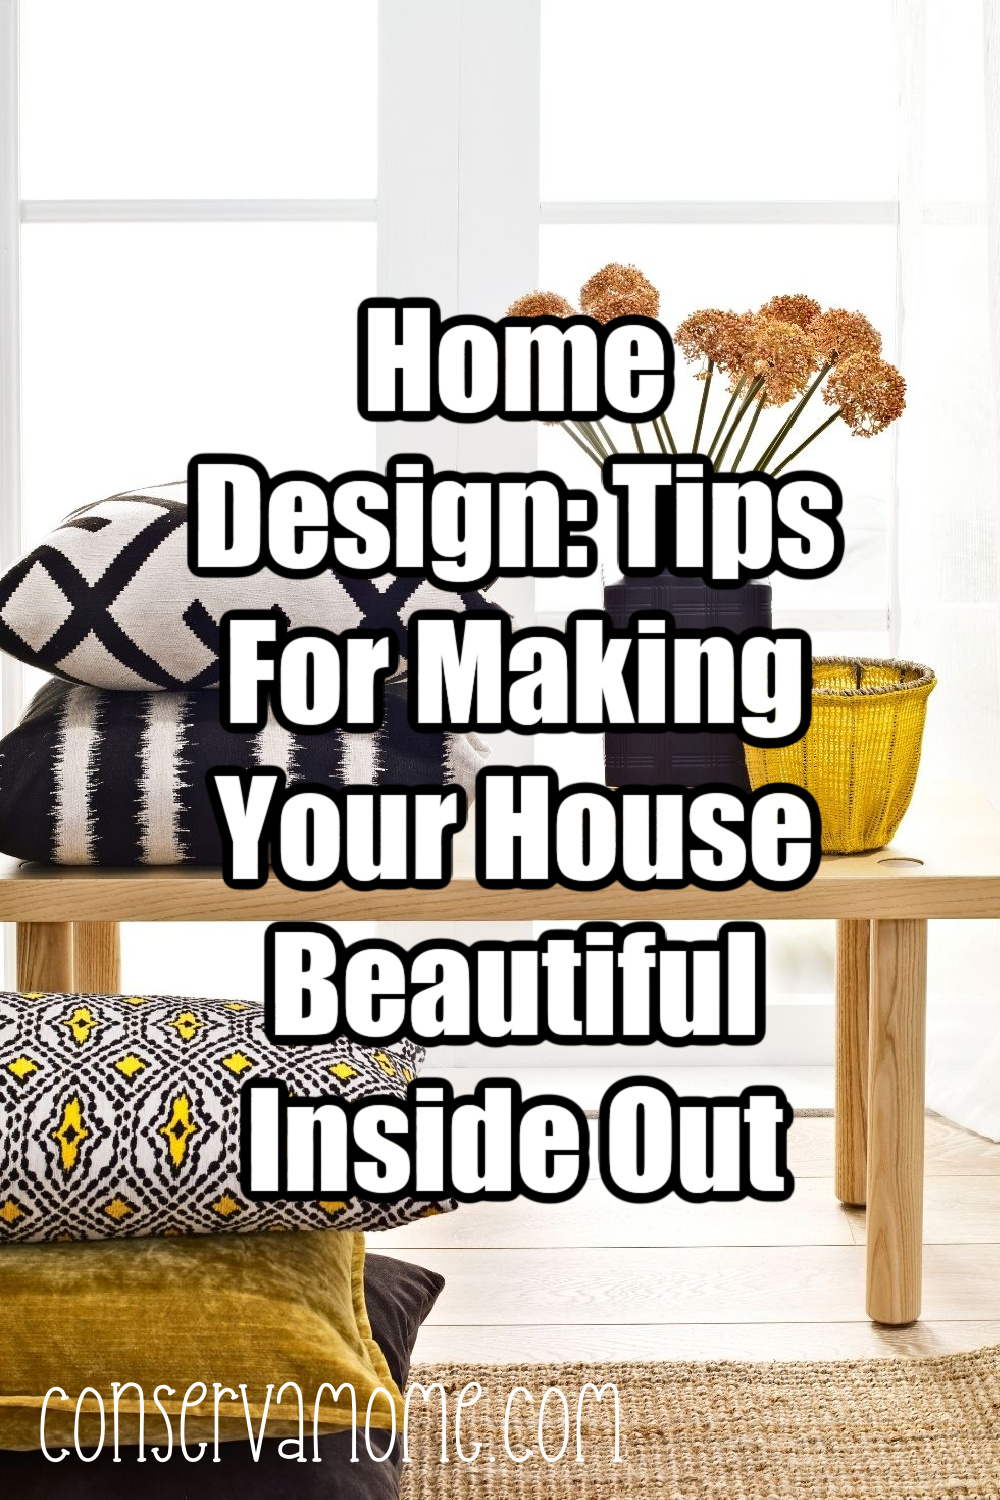 Home Design: Tips For Making Your House Beautiful Inside Out